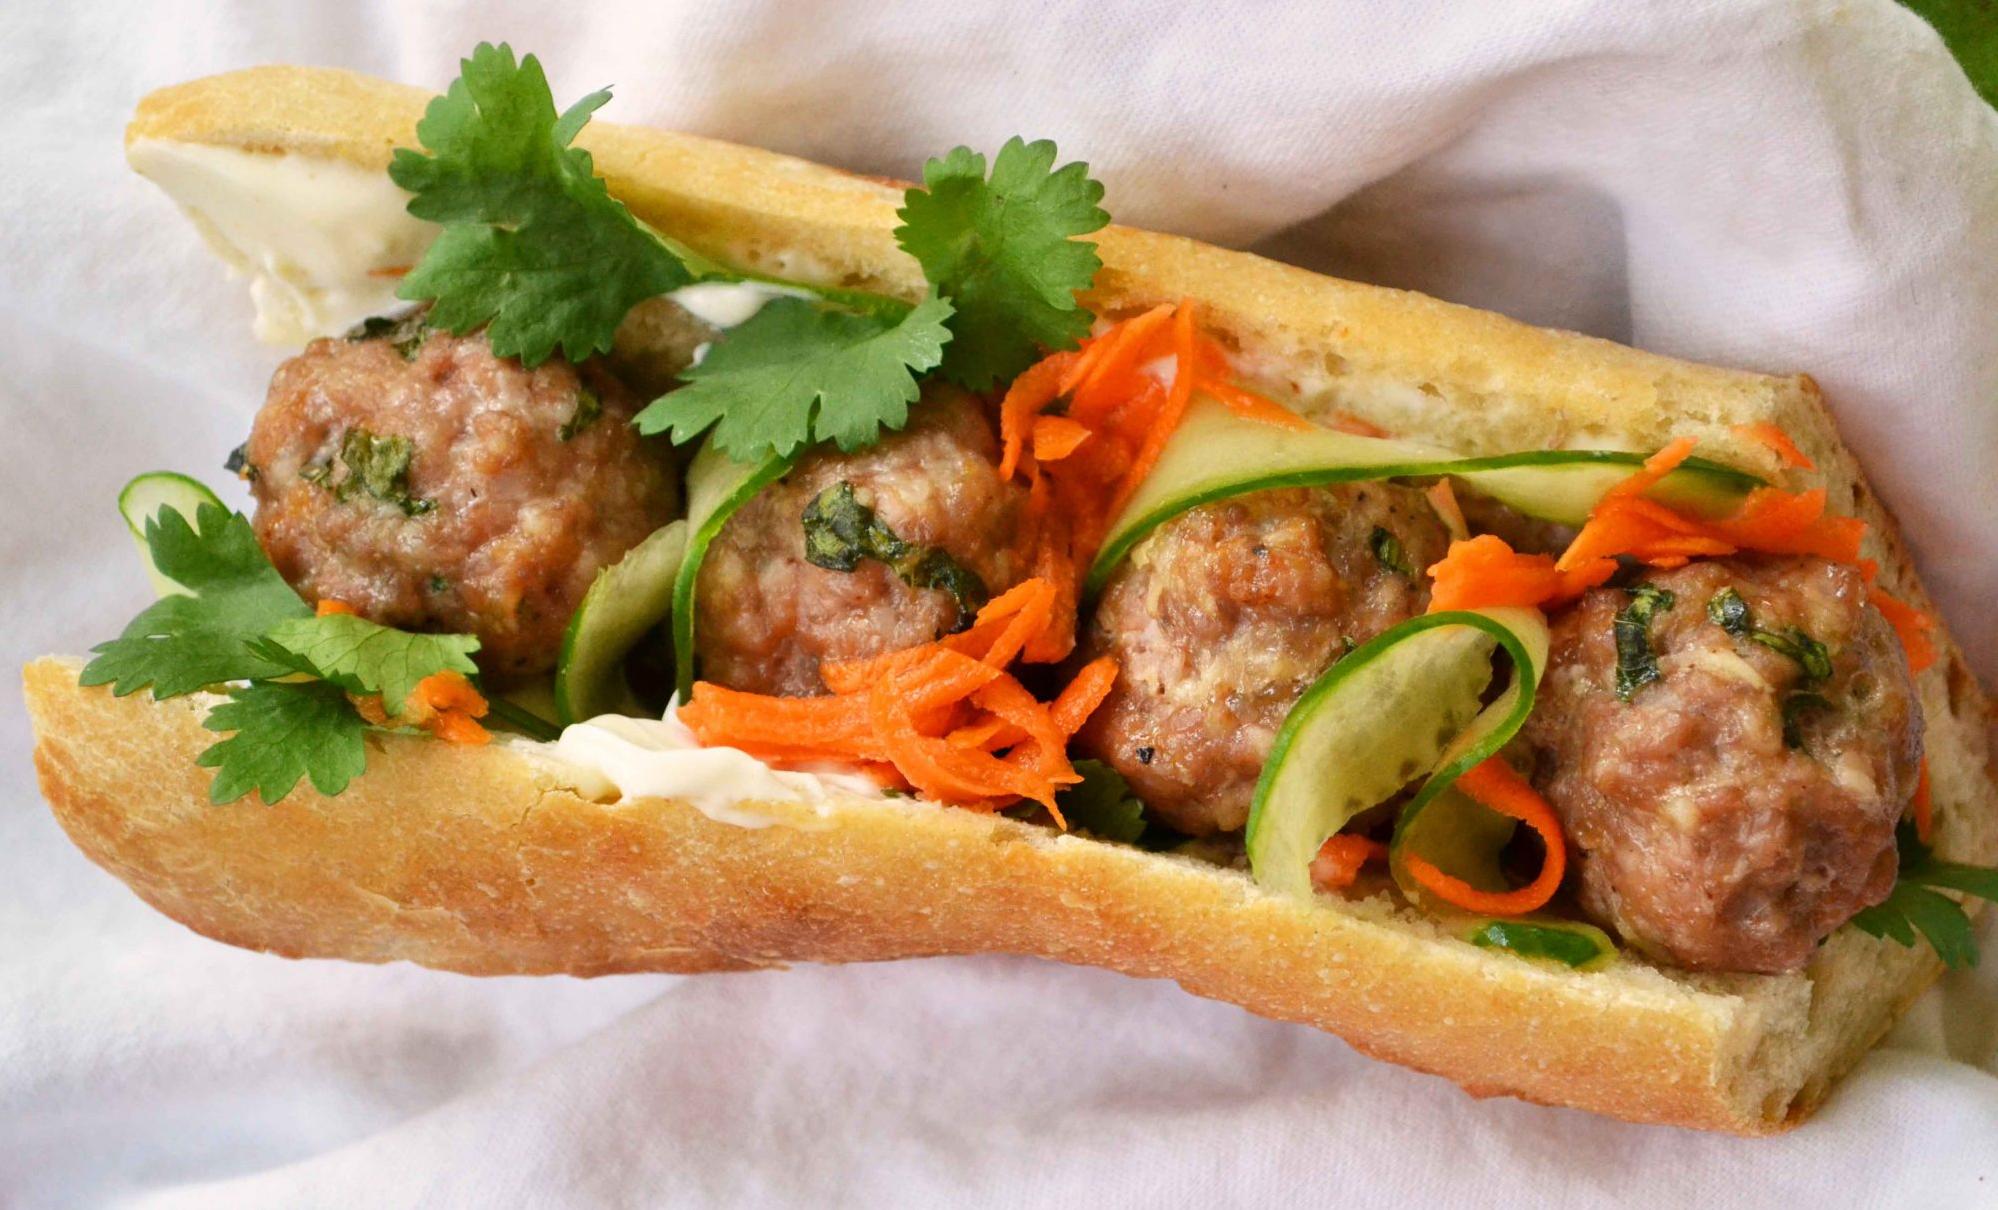  The aroma of this banh mi will make you fall in love with Vietnamese cuisine.